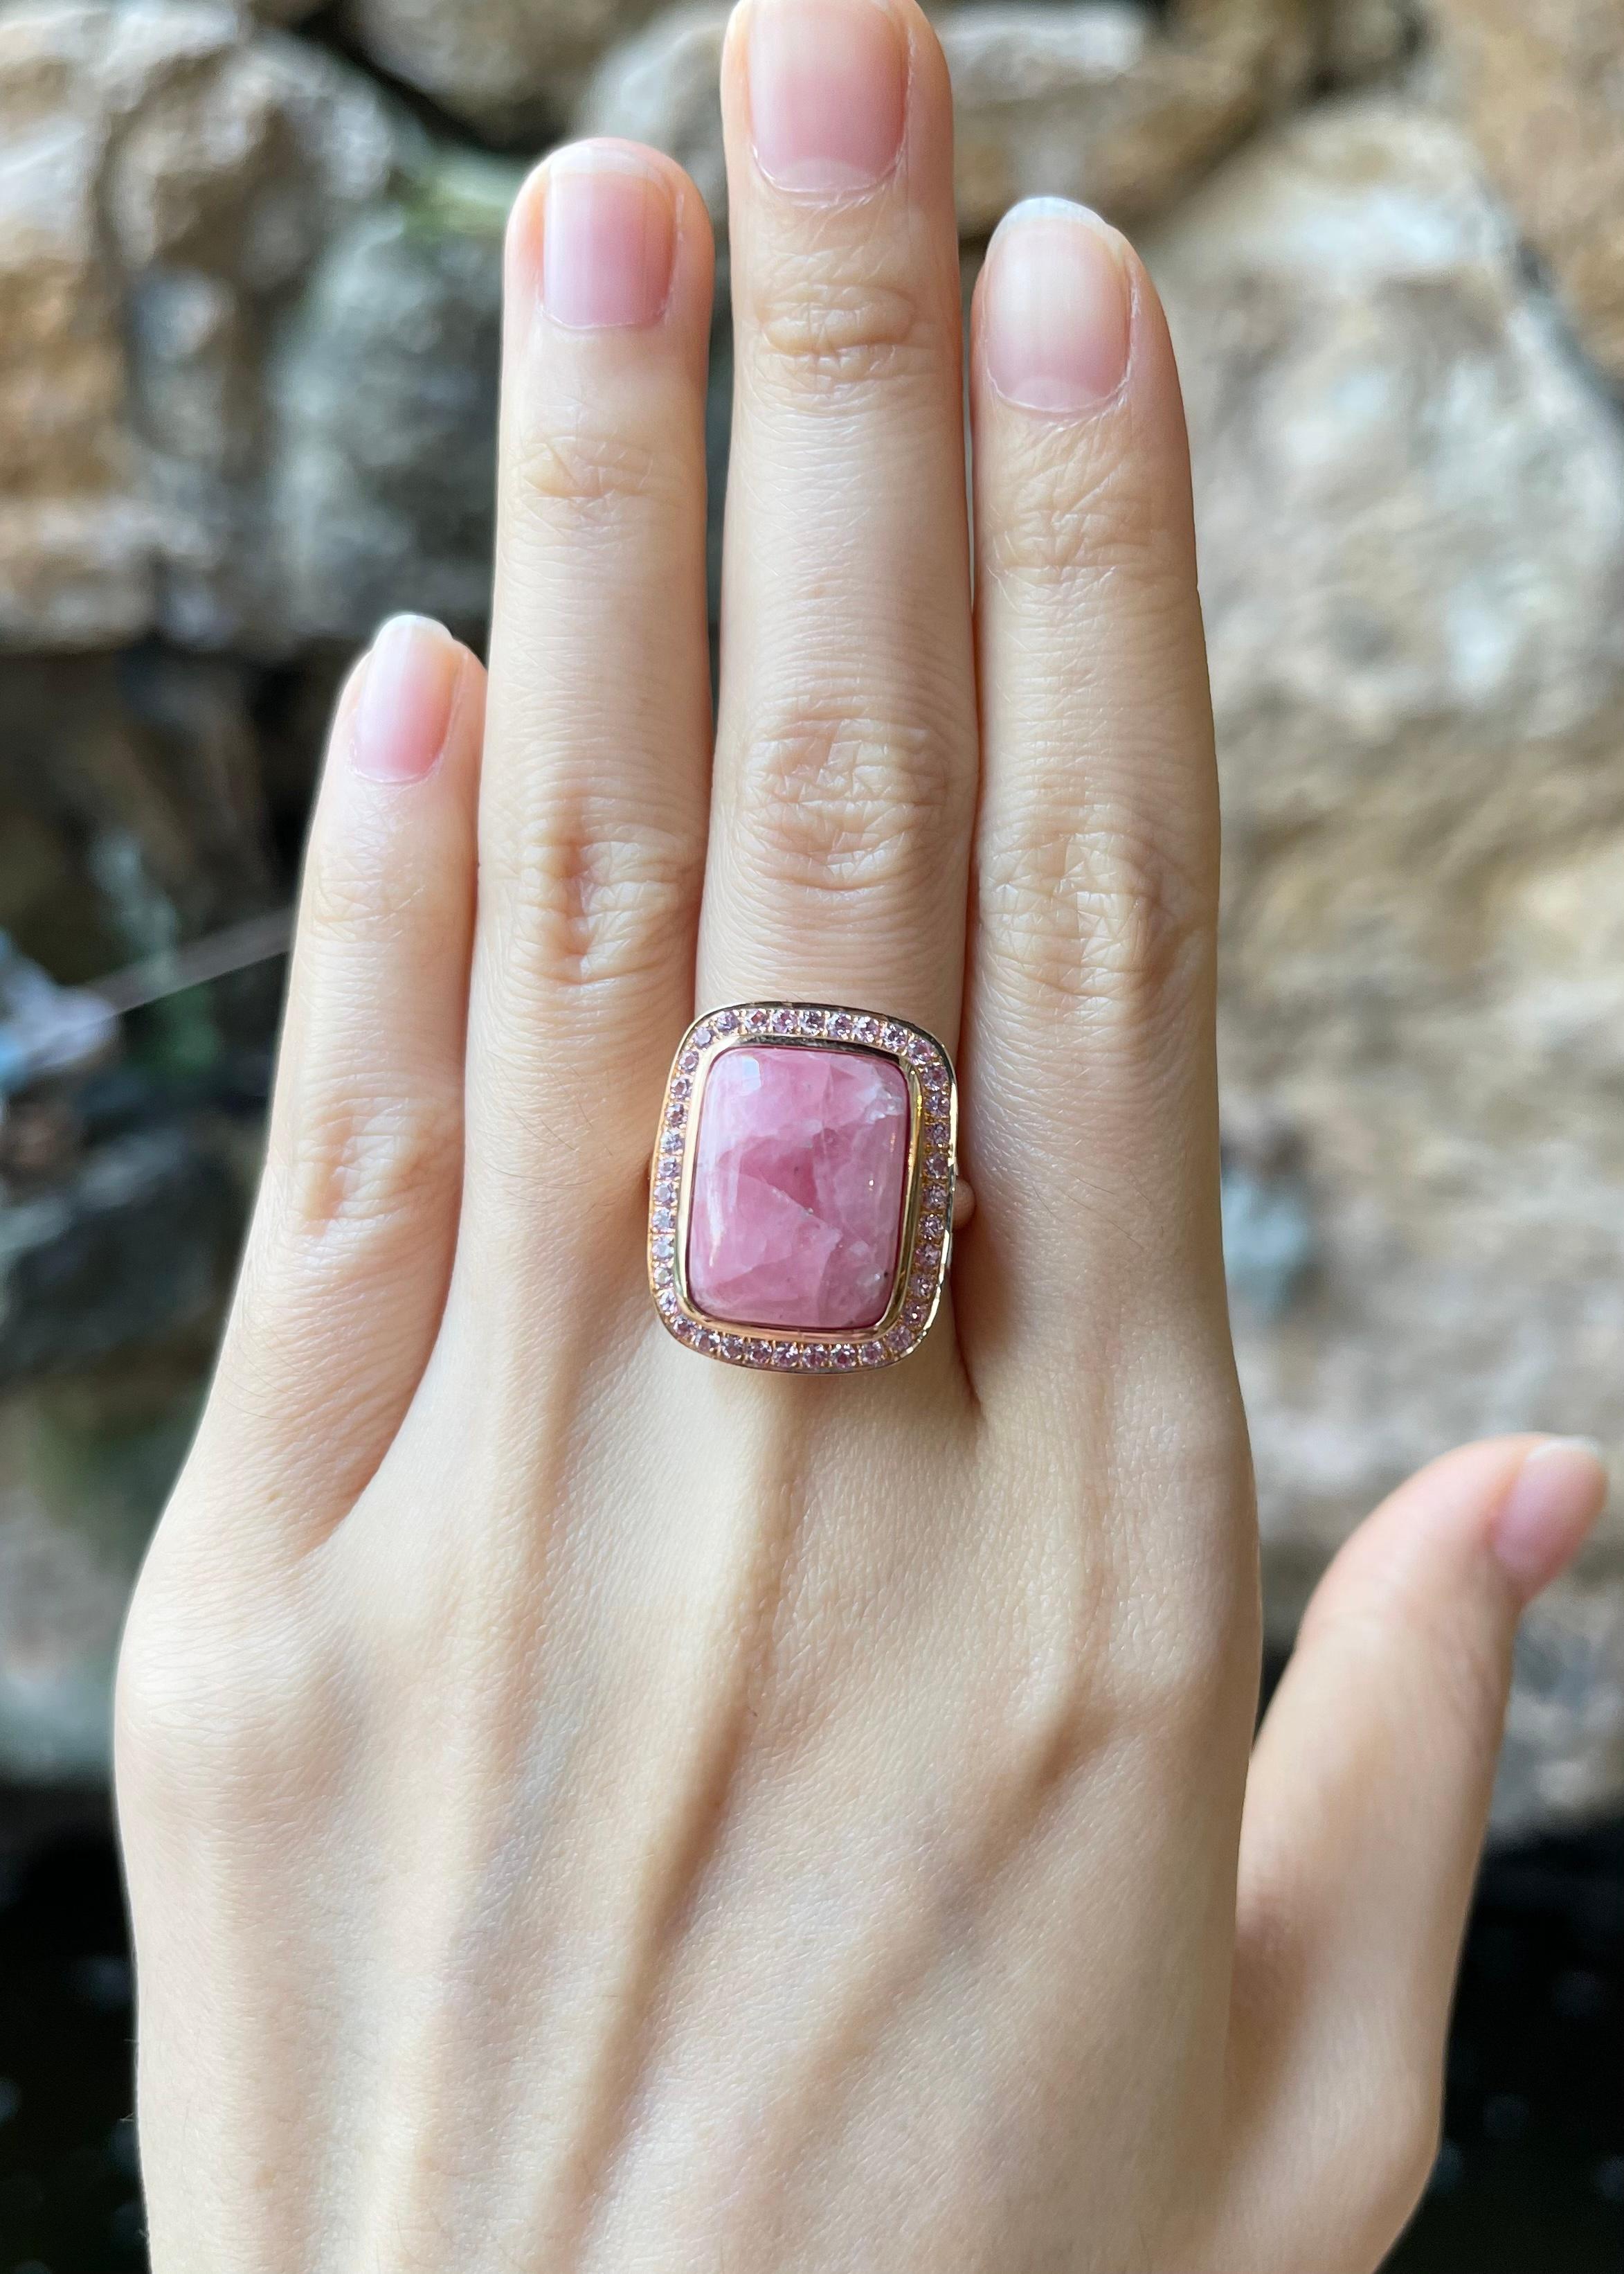 Rhodochrosite 15.56 carats with Pink Sapphire 0.77 carat Ring set in 18K Rose Gold Settings

Width: 1.7 cm 
Length: 2.2 cm
Ring Size:  53
Total Weight: 11.78 grams

